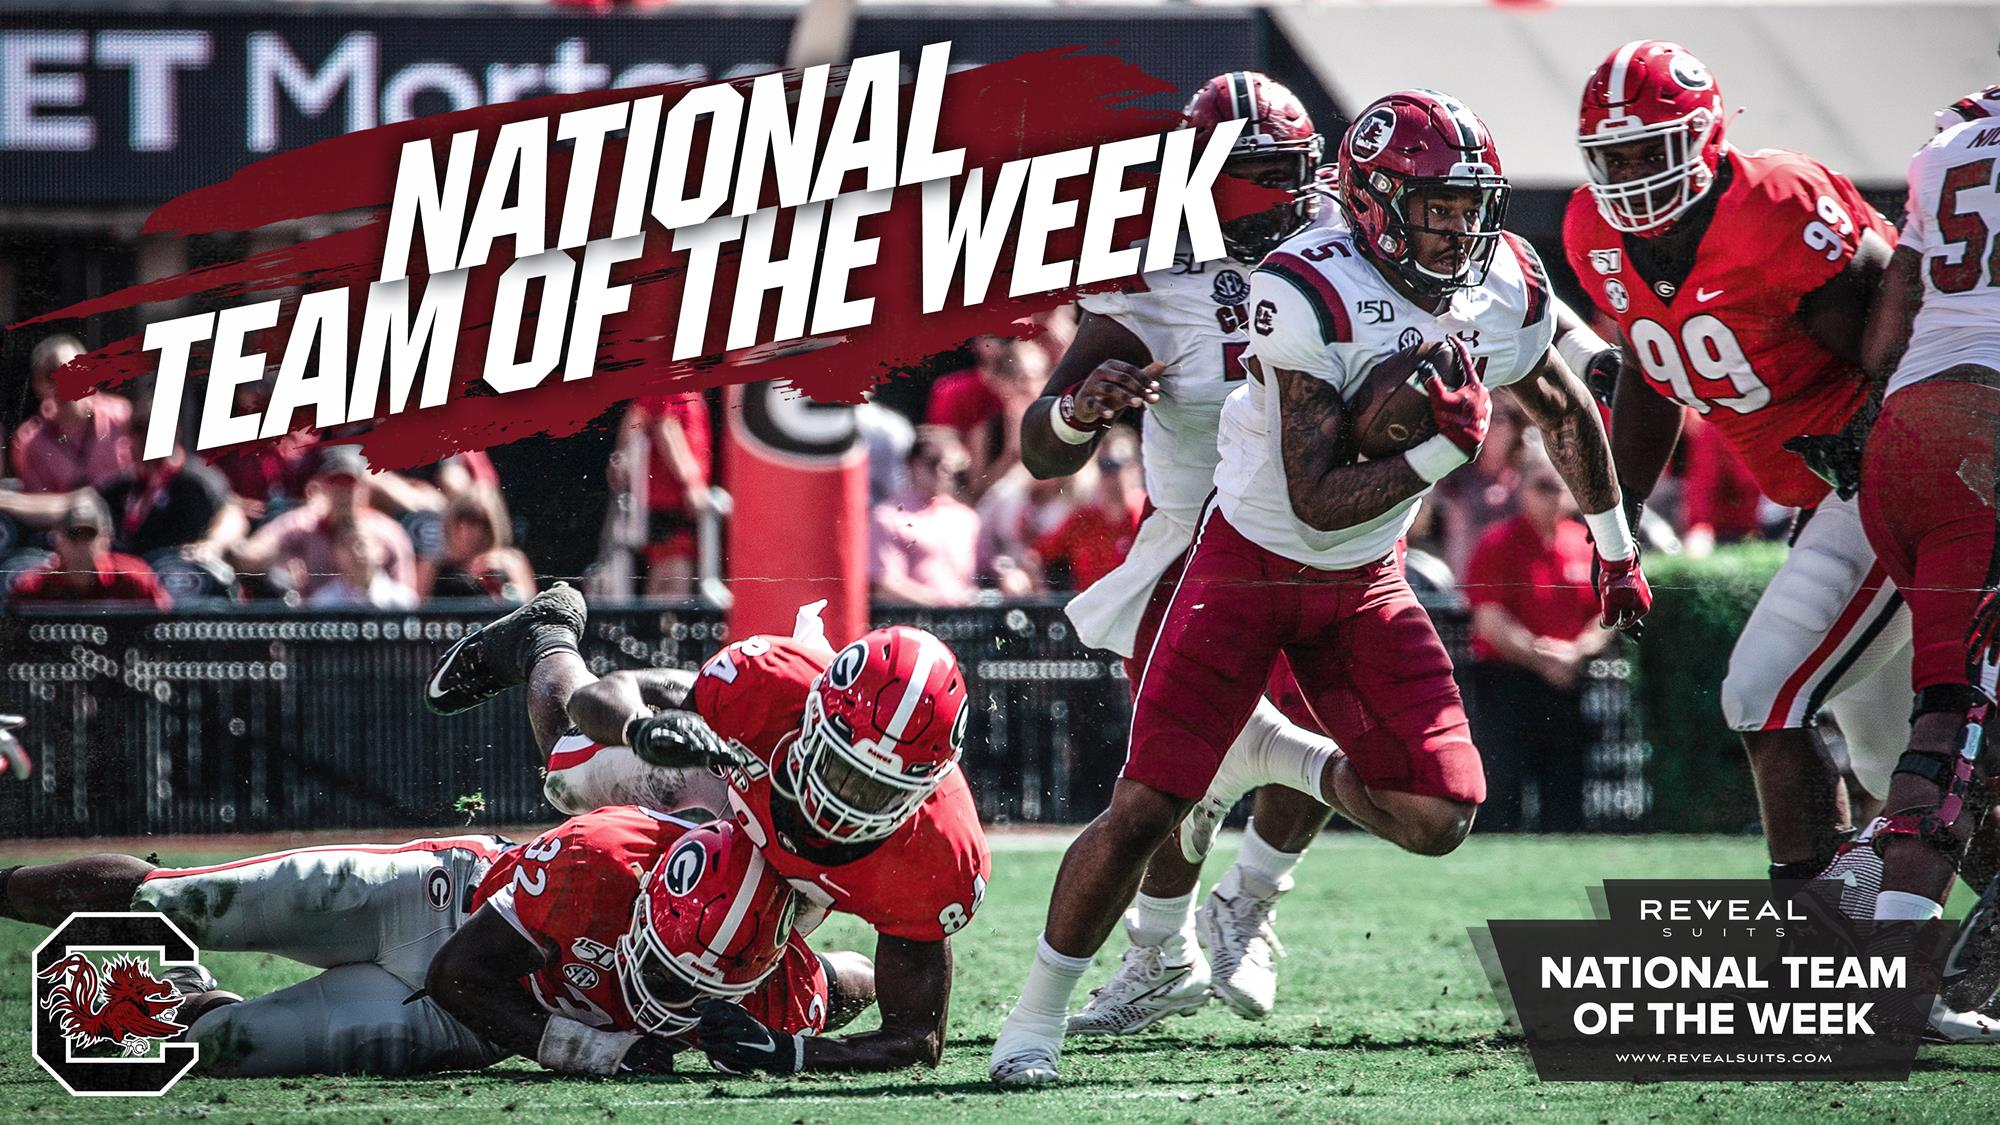 South Carolina is Reveal Suits National Team of the Week